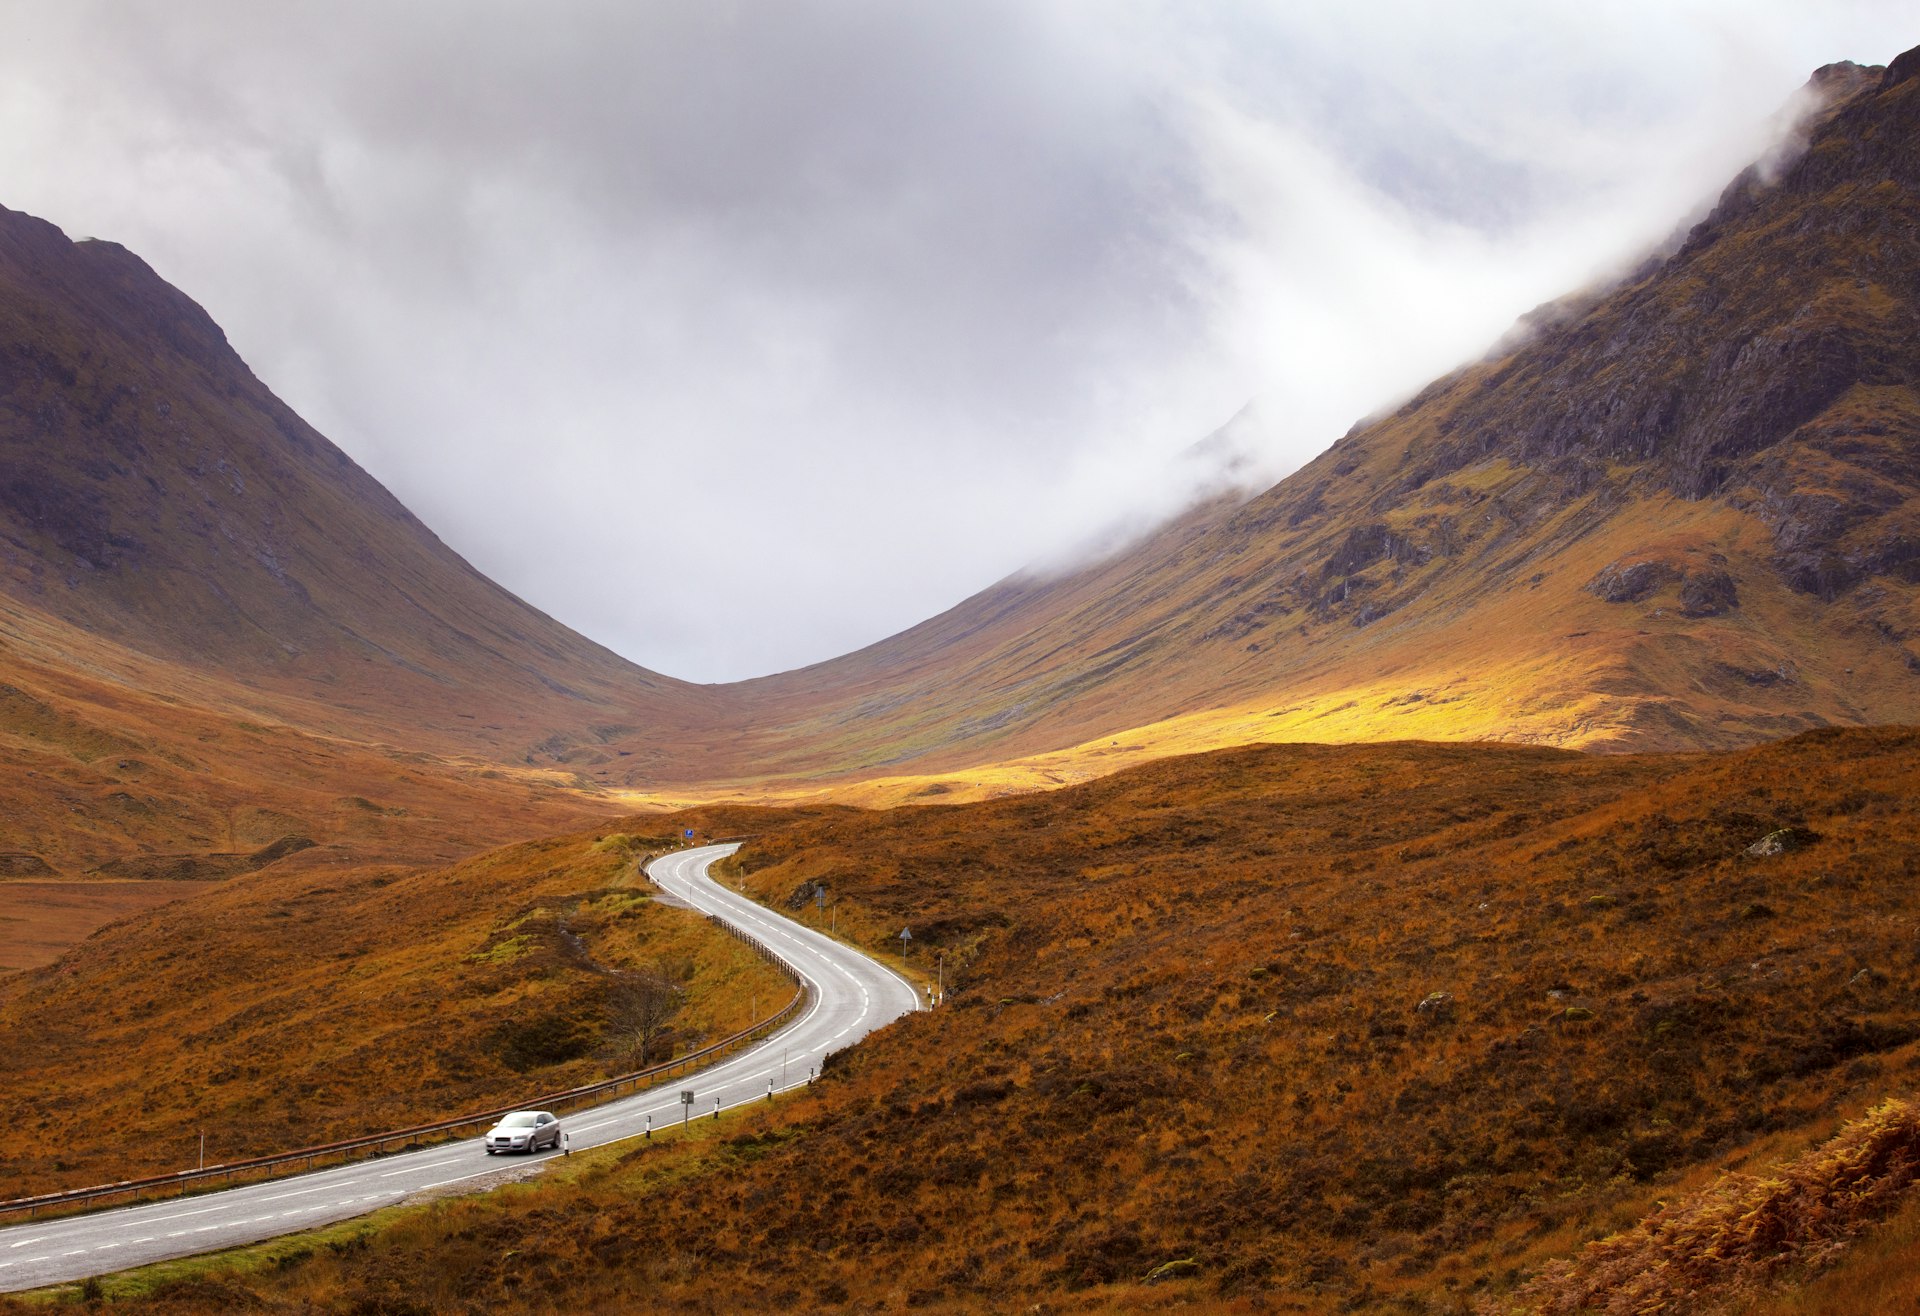 Winding road through the Scottish Highlands on a gray day in fall